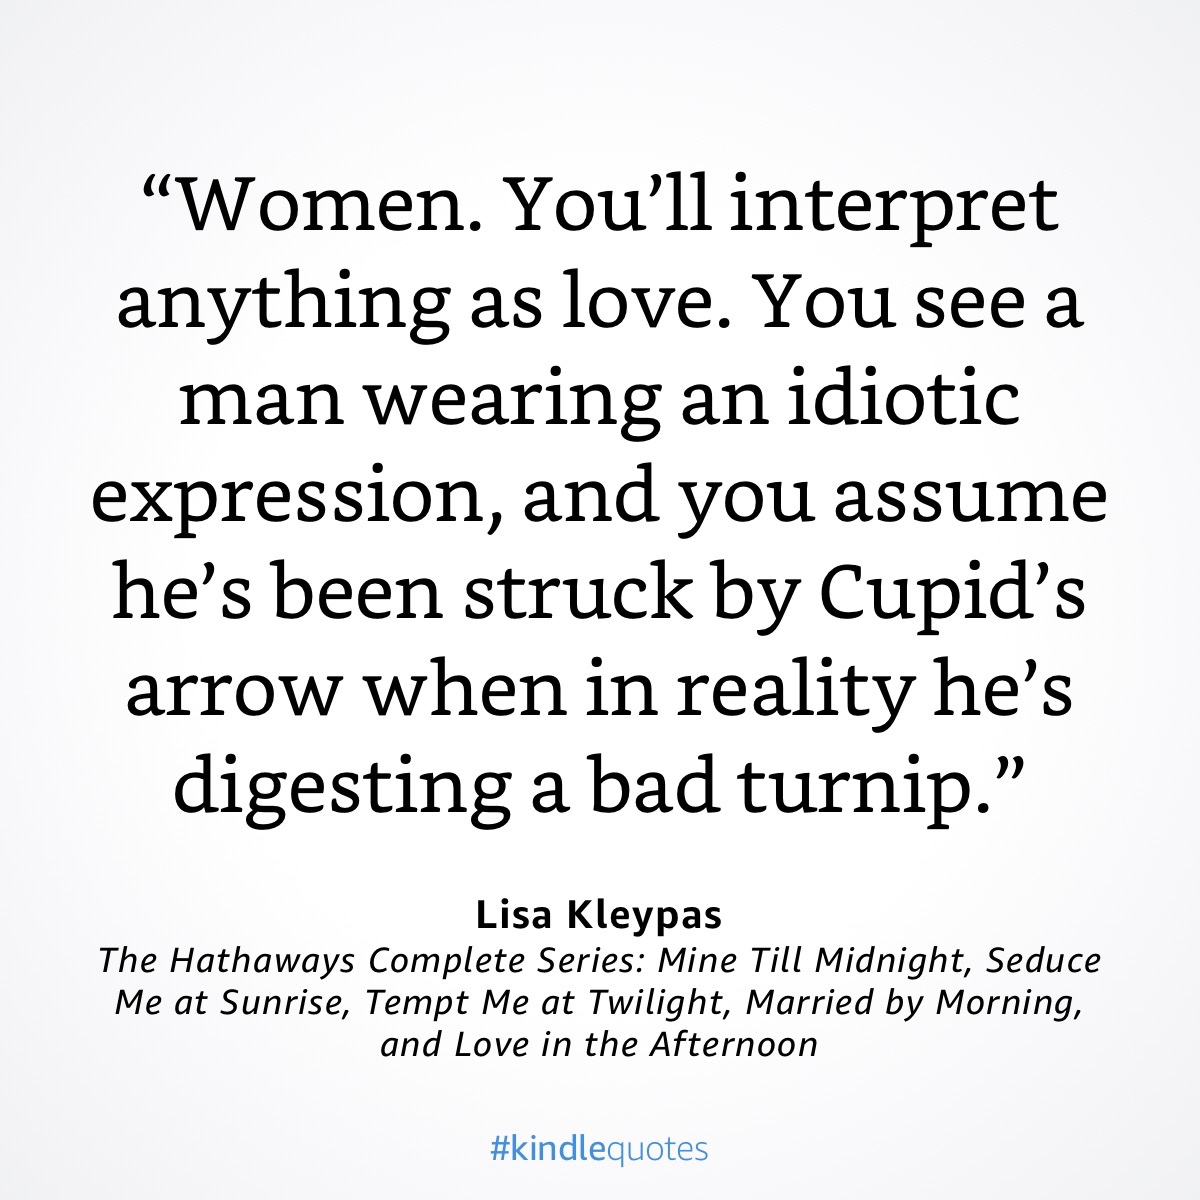 I’ve read two series by Kleypas, and in each there was one character who mentioned turnips regularly. With the Ravenels, it was West. With the Hathaways, it’s Leo — the quotes below are both his. Two of my favorite characters. Clearly I am drawn to turnipy types. 